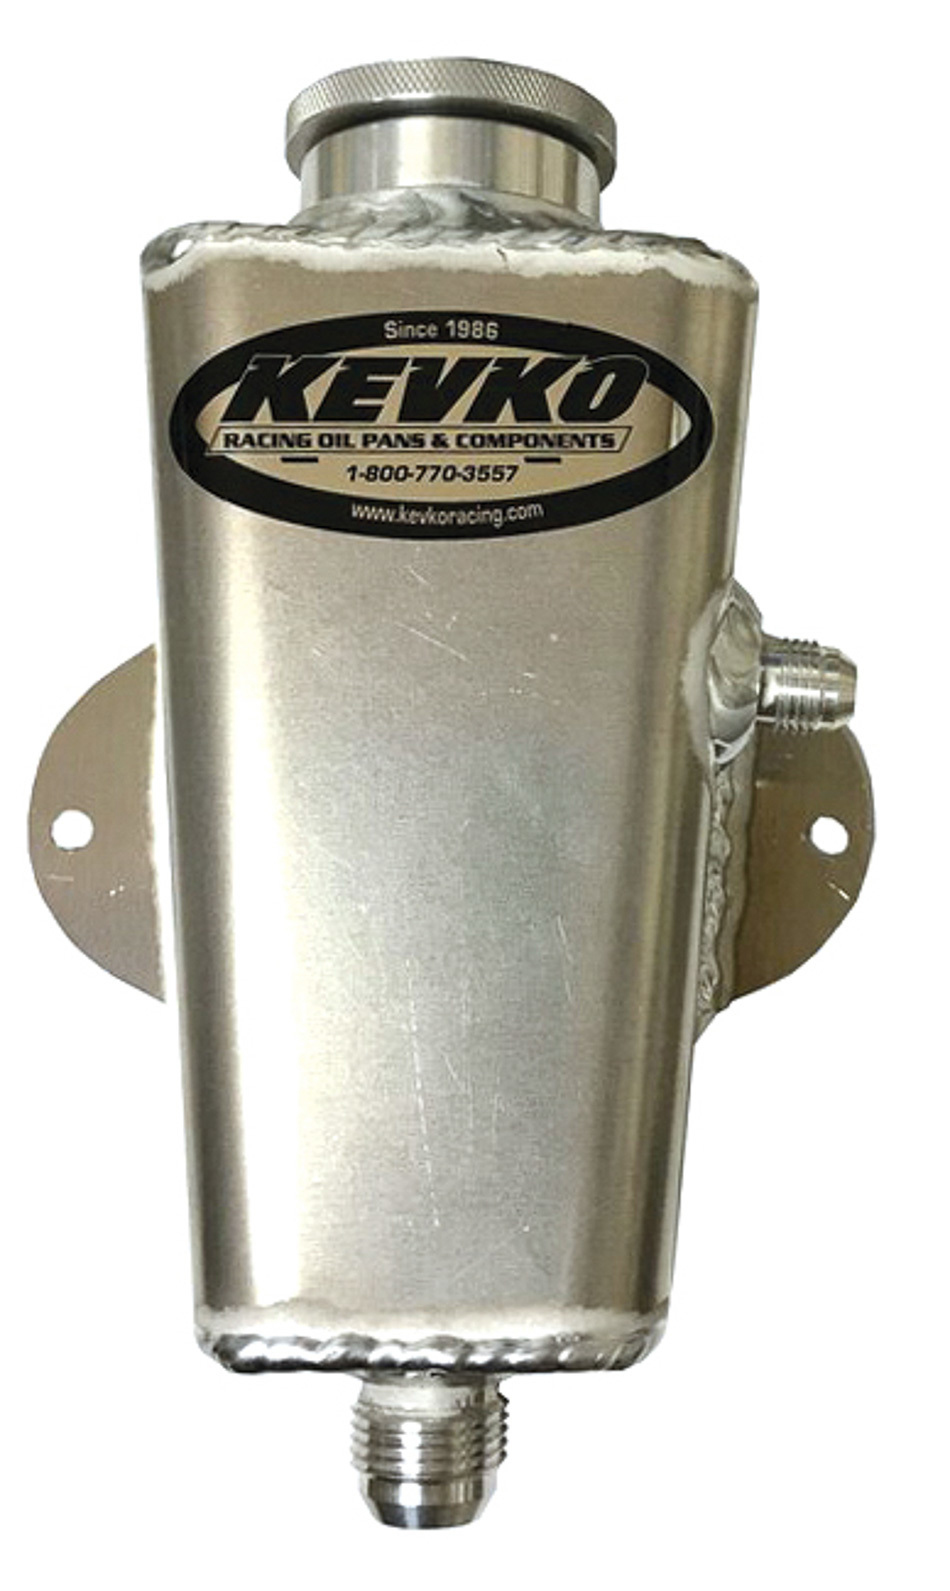 Kevko Oil Pans K9087-LV Power Steering Reservoir, Bolt-On, Firewall Mount, 10 AN Male Bottom Outlet, 6 AN Male Driver Side Outlet, Vented Cap / Hardware Included, Aluminum, Clear Anodized, Universal, Each